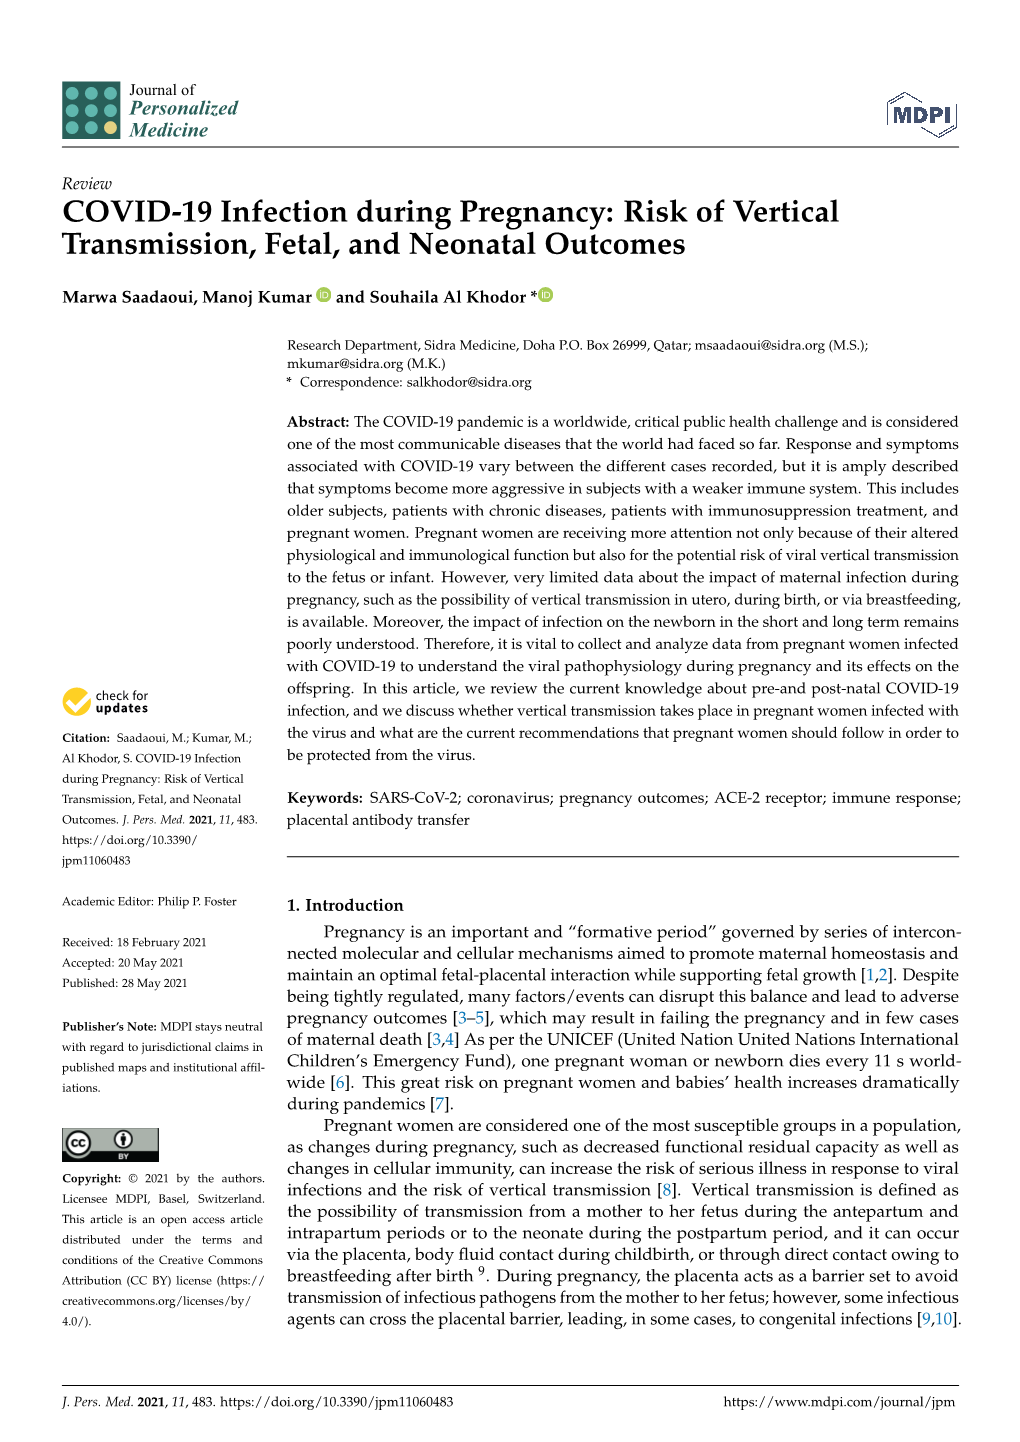 Risk of Vertical Transmission, Fetal, and Neonatal Outcomes